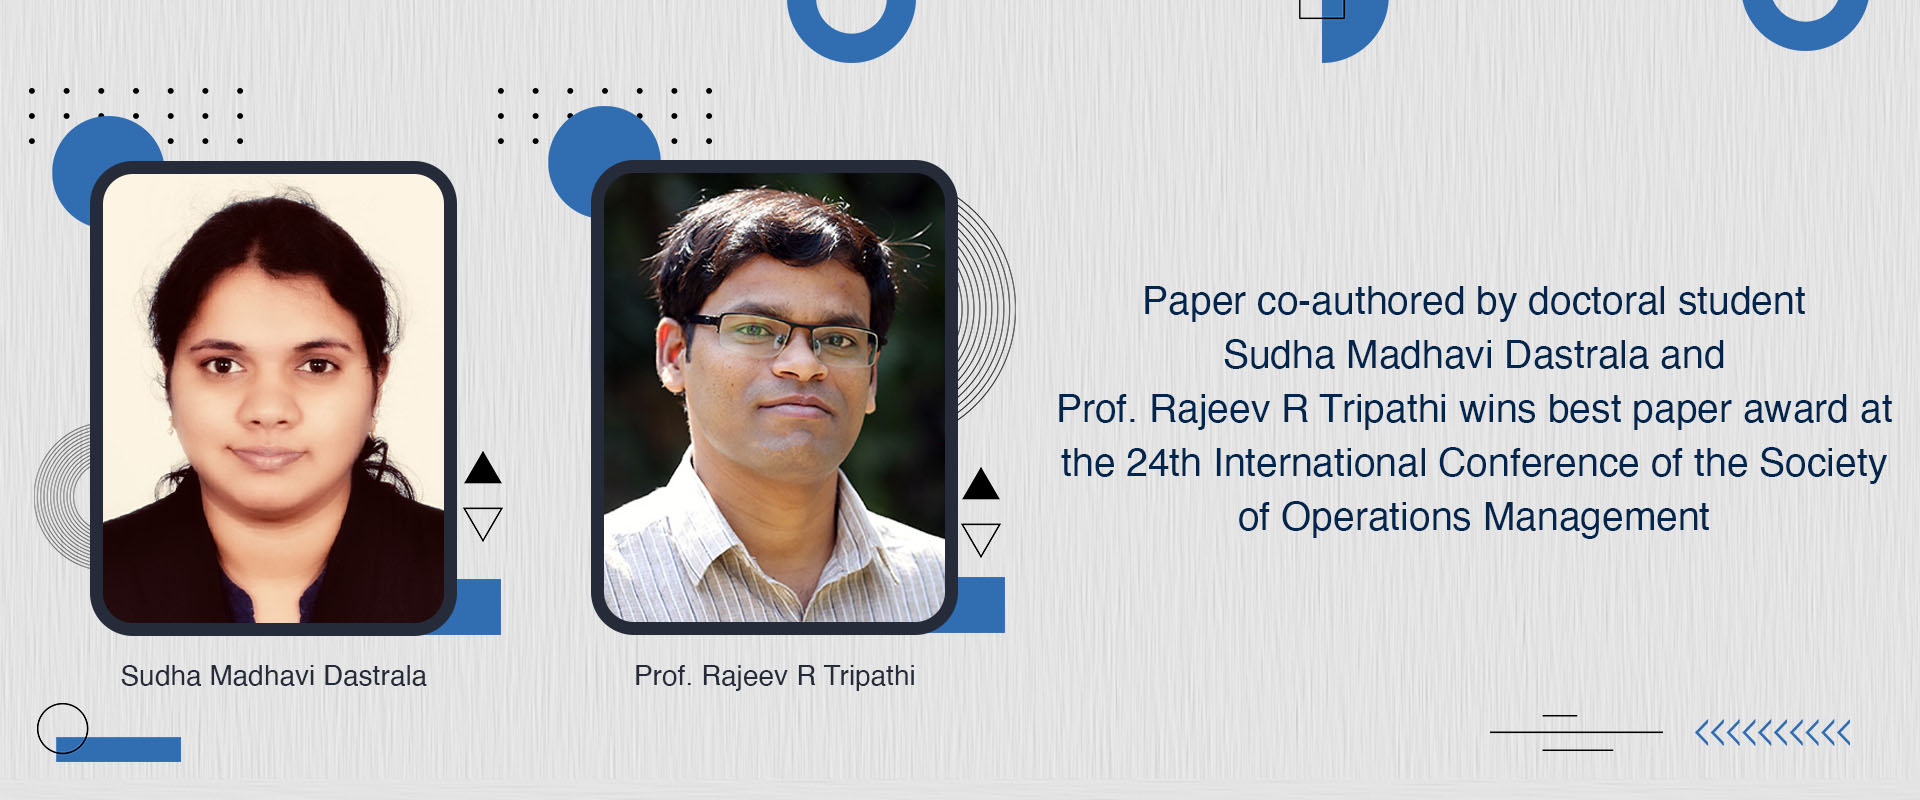 Paper co-authored by doctoral student Sudha Madhavi Dastrala and Prof. Rajeev R Tripathi wins best paper award at the 24th International Conference of the Society of Operations Management